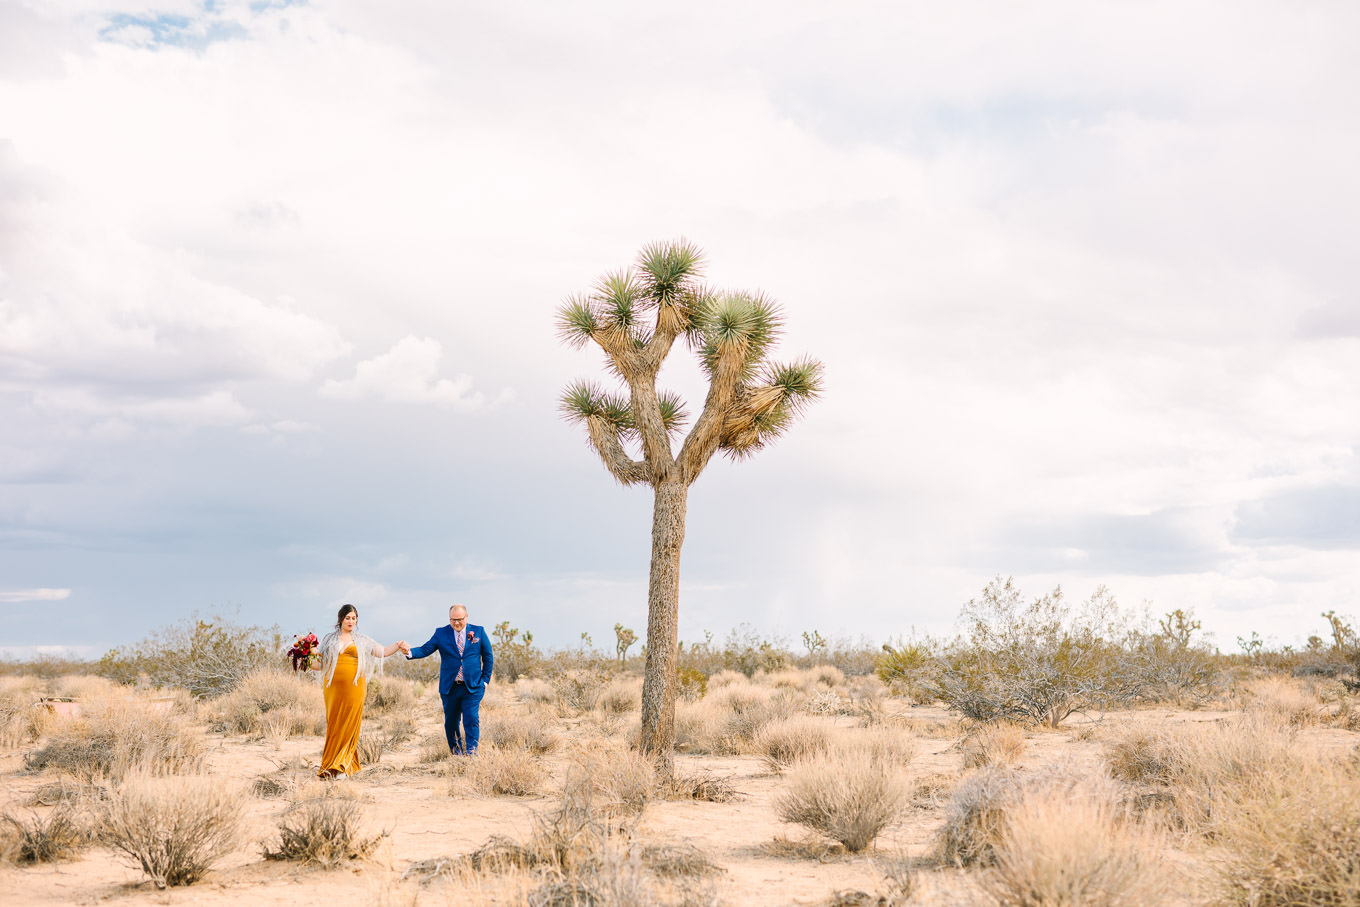 Joshua Tree wedding at The Ruin Venue | Wedding and elopement photography roundup | Los Angeles and Palm Springs  photographer | #losangeleswedding #palmspringswedding #elopementphotographer

Source: Mary Costa Photography | Los Angeles